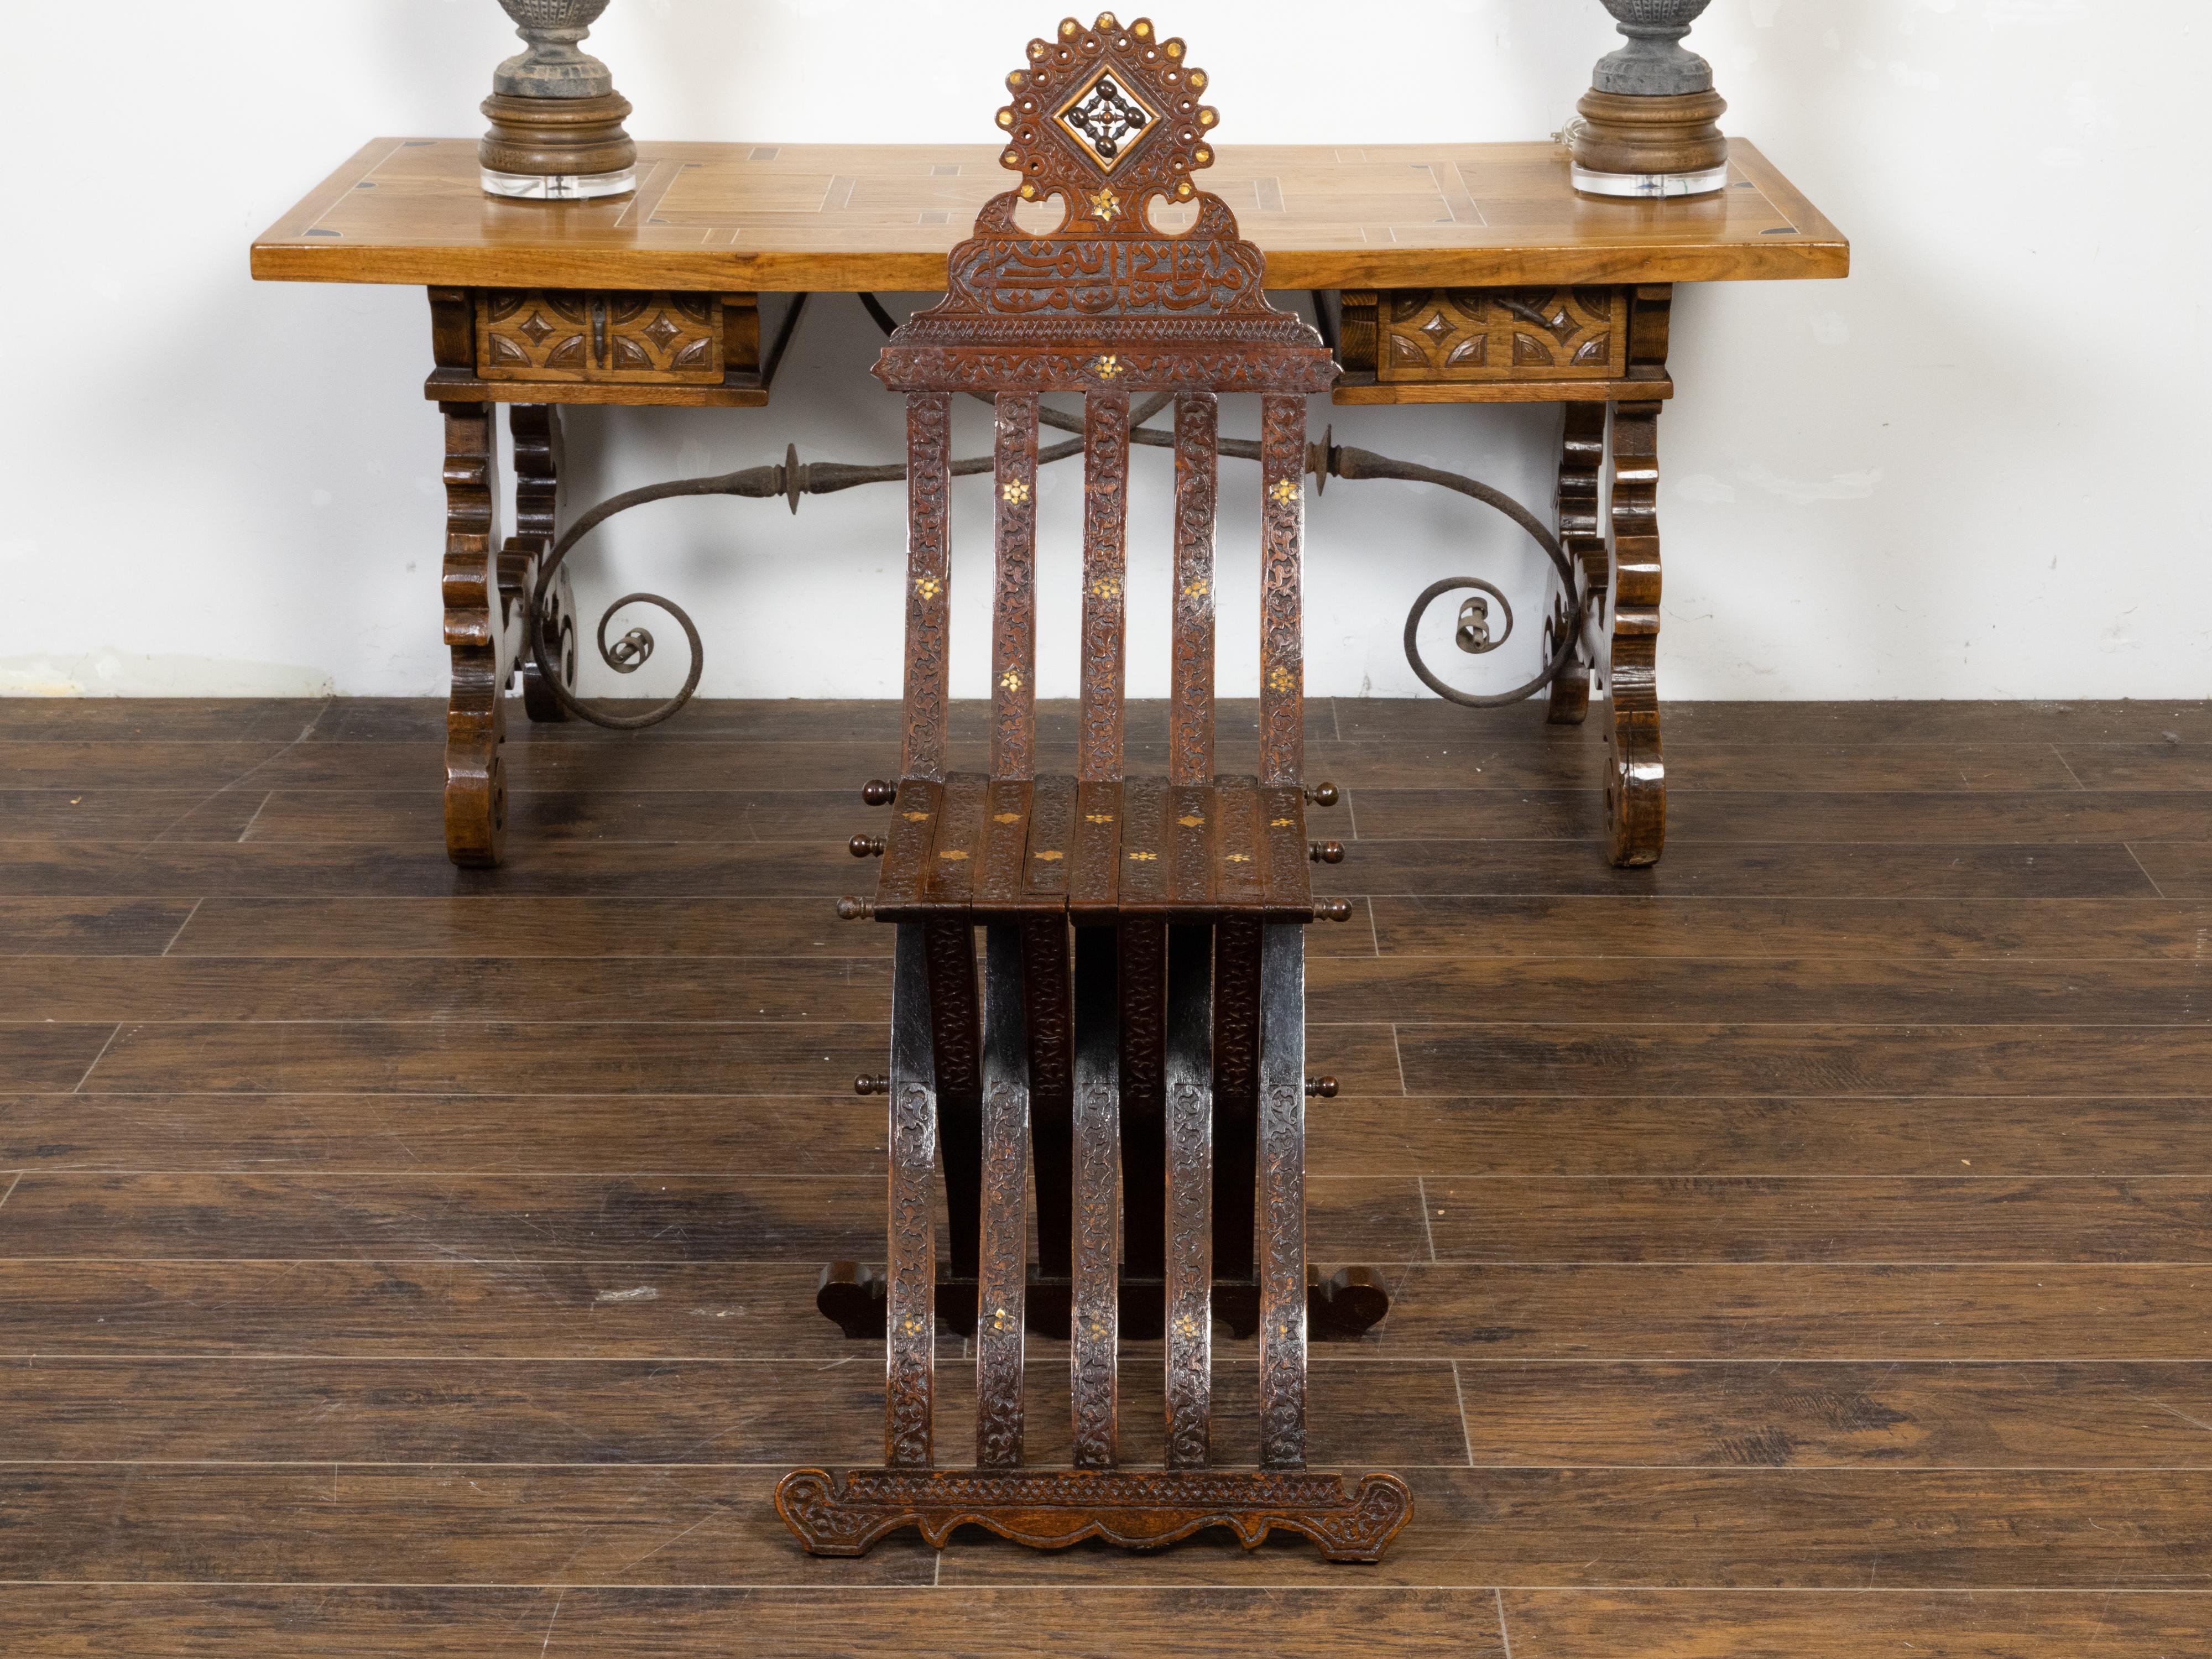 A Moroccan Moorish style accent side chair from the early 20th century, with richly carved décor, mother-of-pearl inlay, Arabic calligraphy and X-Form base. Created in Morocco during the Turn of the Century which saw the transition between the 19th